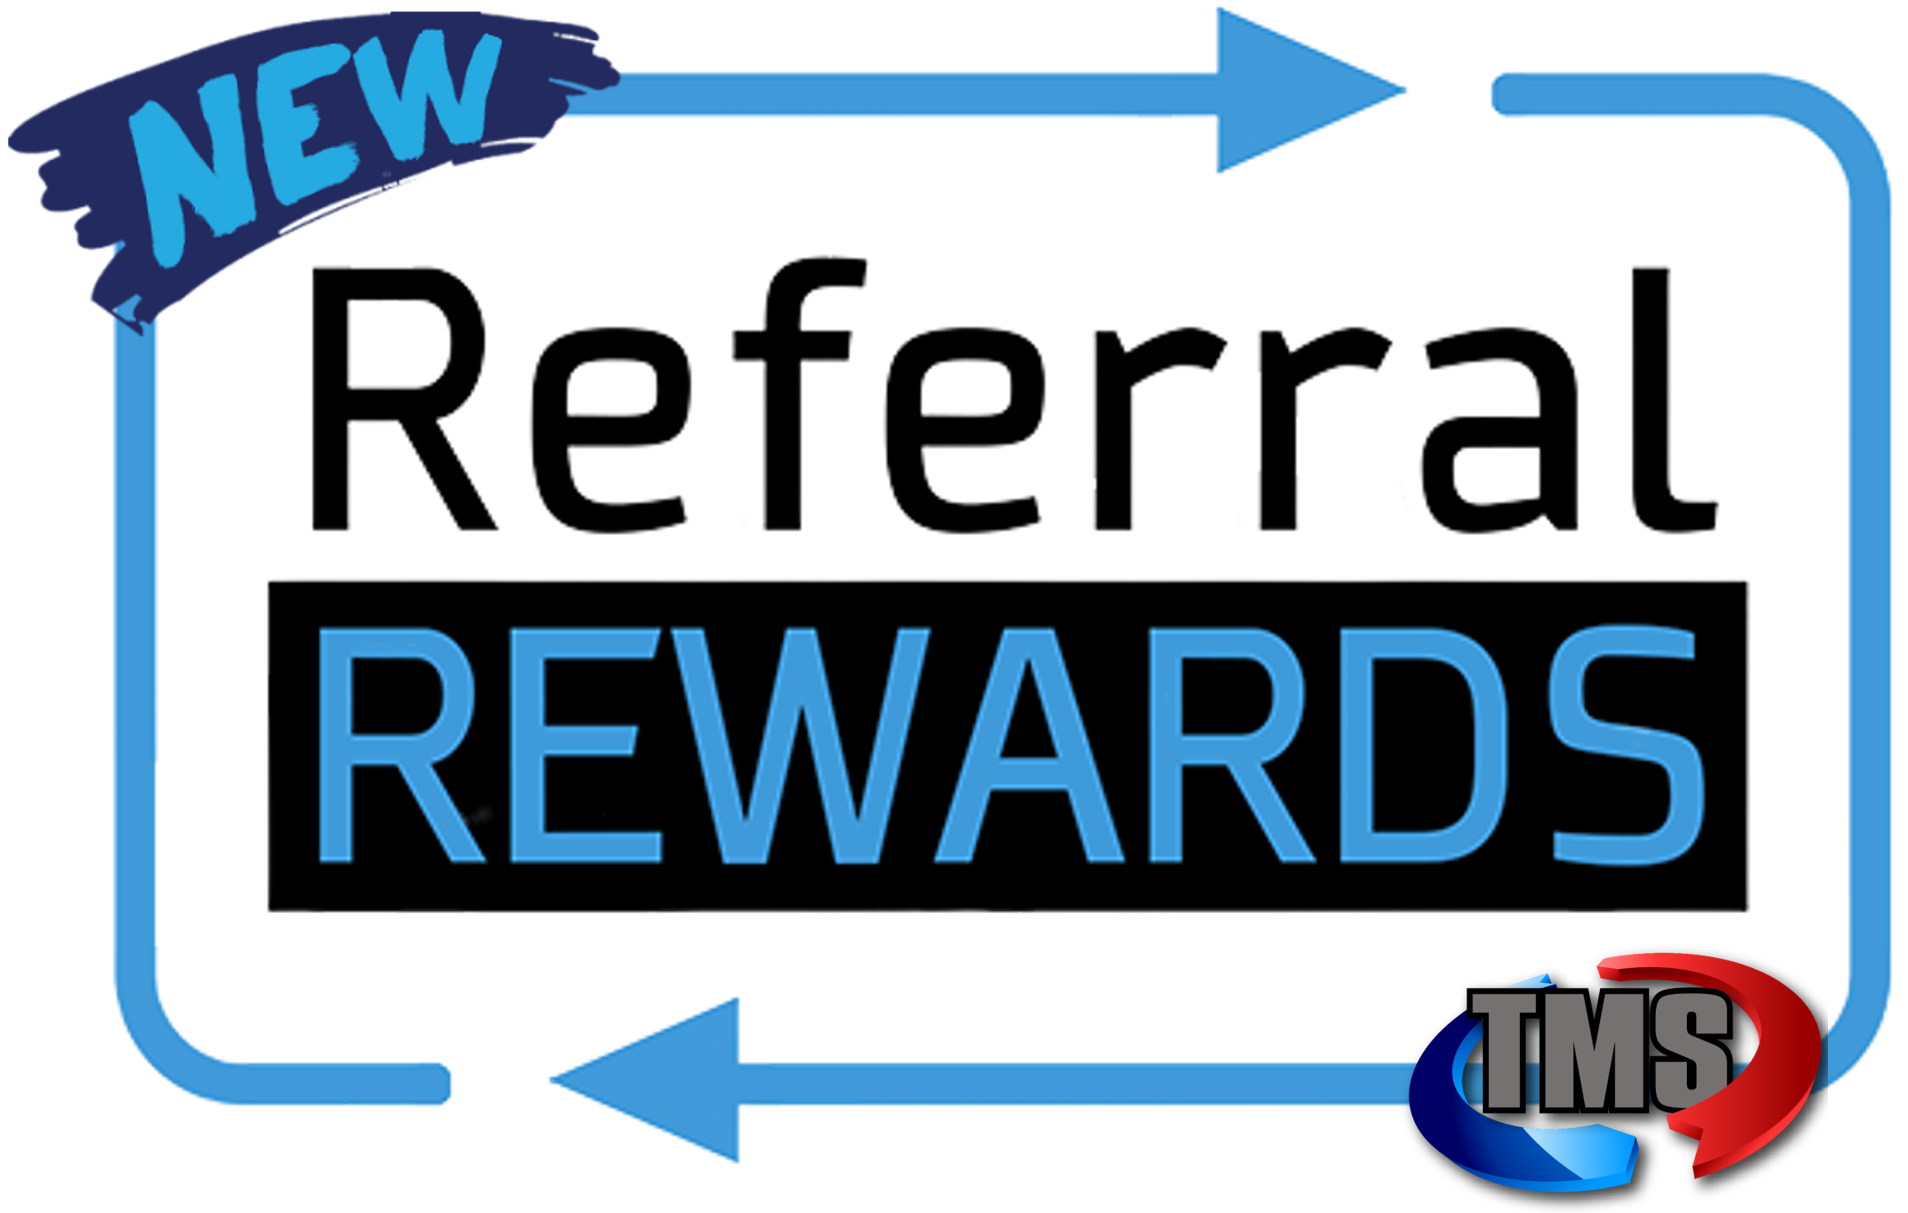 total mechanical systems referral rewards refer friend family